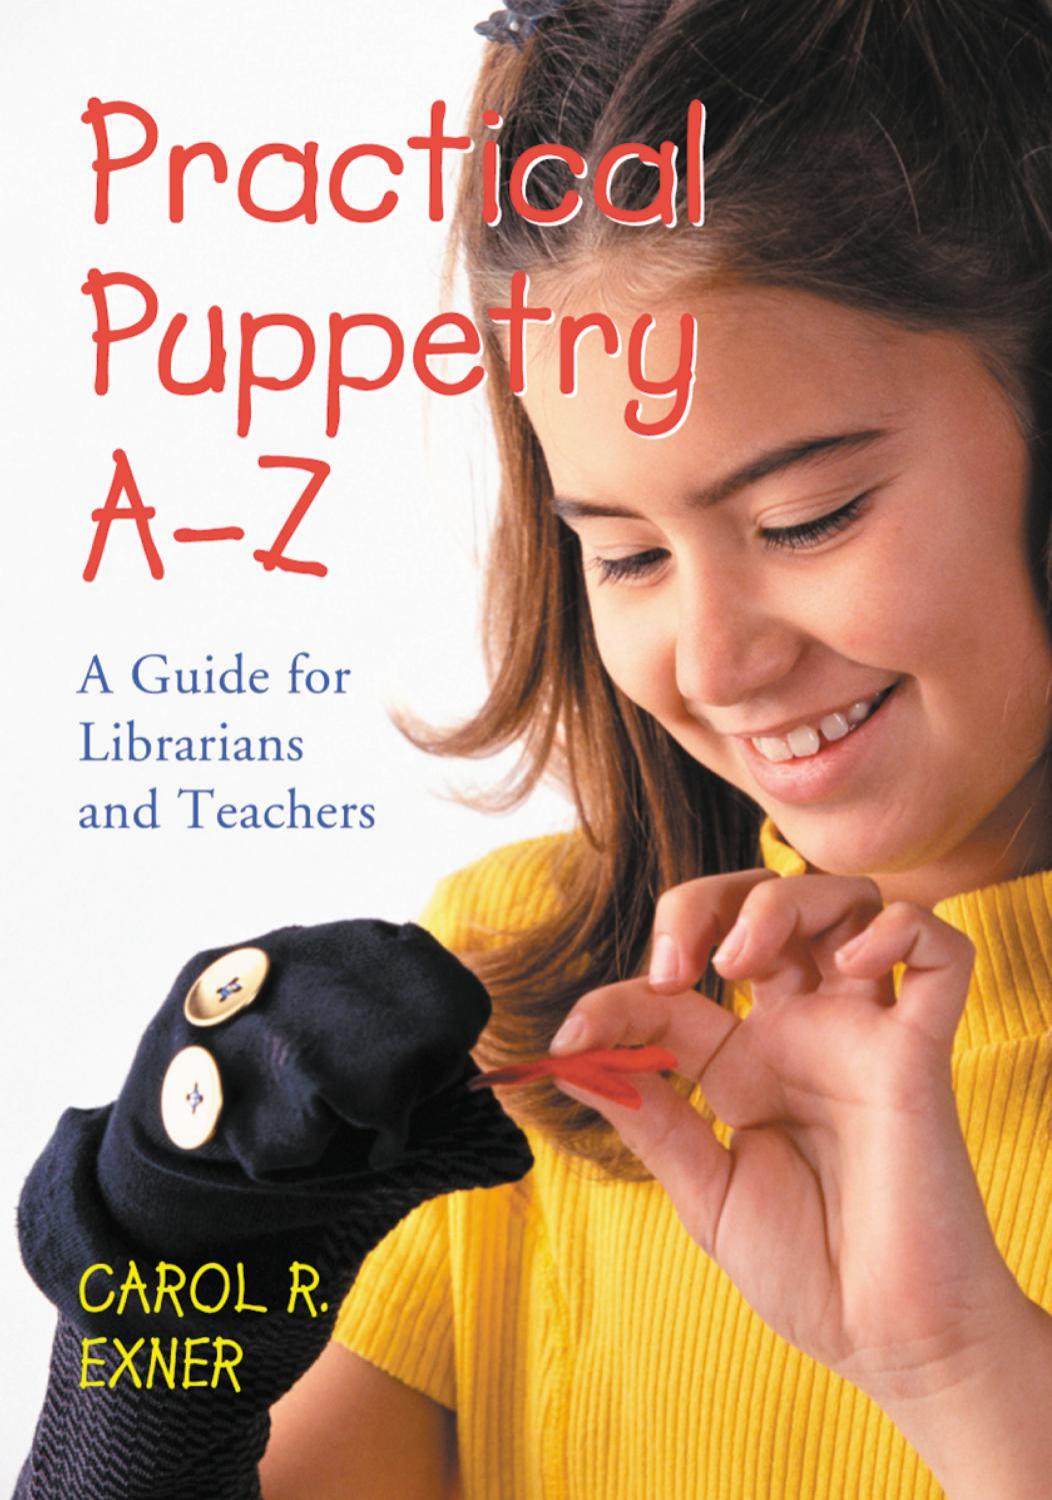 Practical Puppetry A-Z : A Guide for Librarians and Teachers by Carol R. Exner